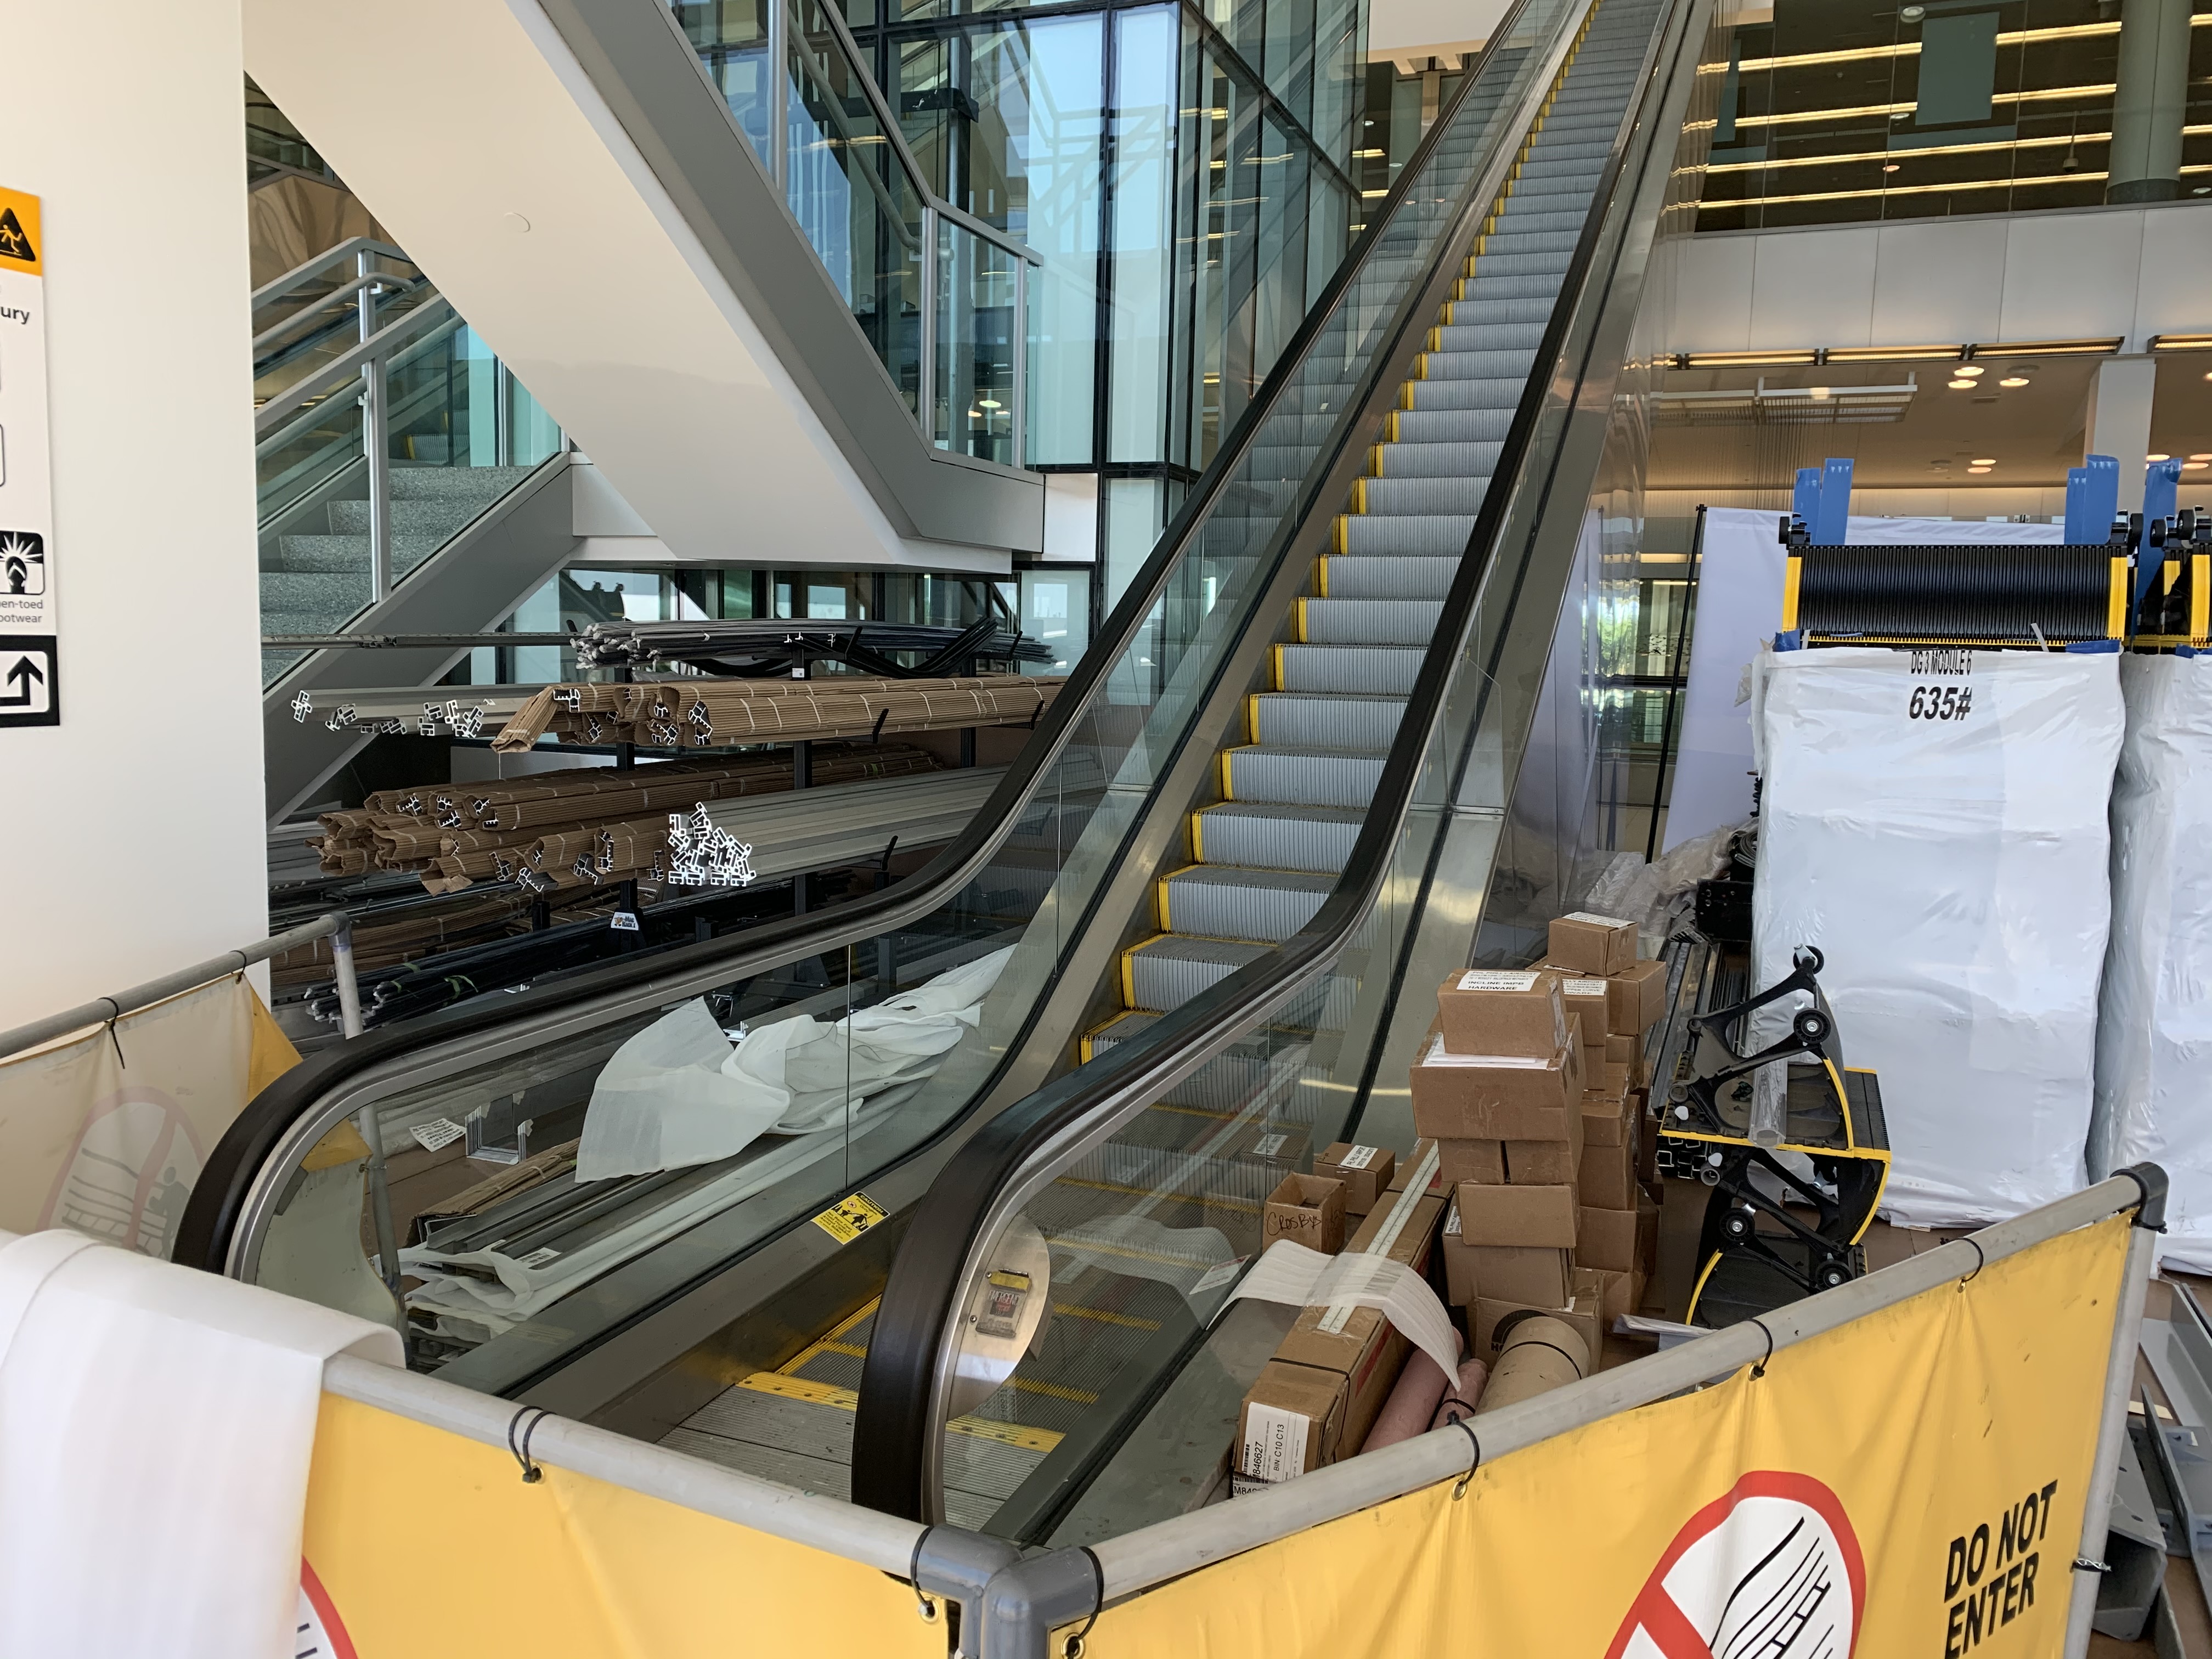 Diminished activity in the terminals allowed the Facilities Maintenance team to perform repairs like to this escalator in Terminal A-West without inconveniencing guests